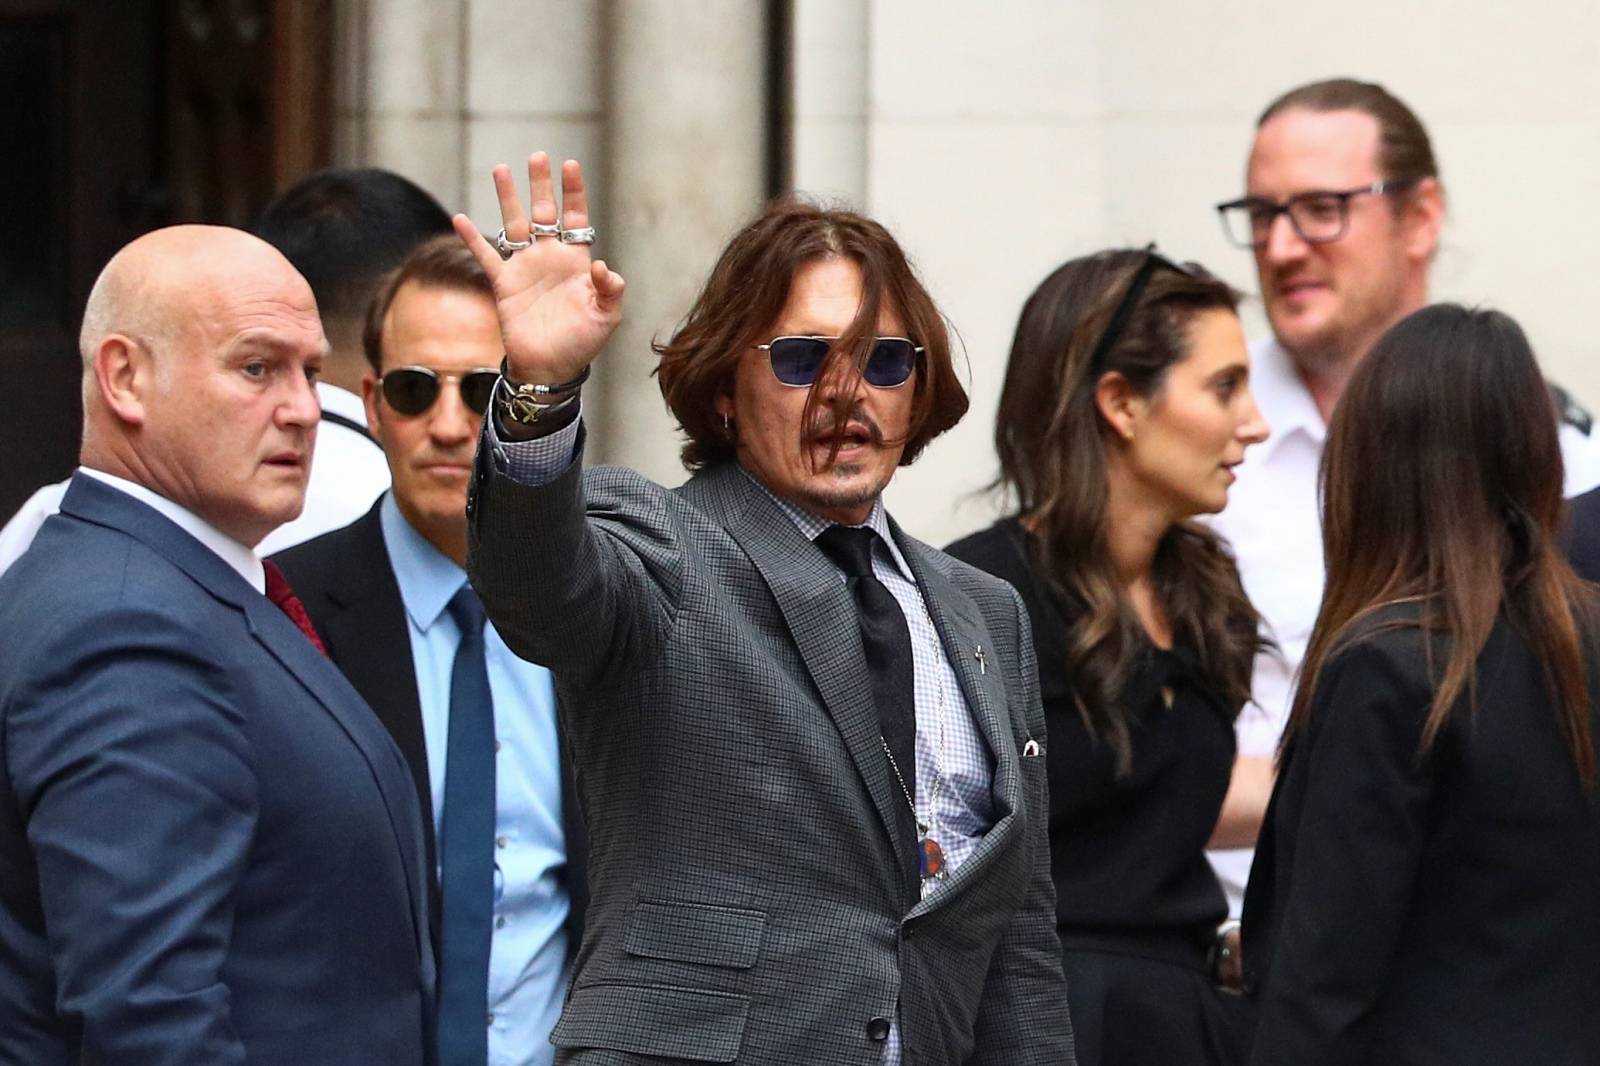 Actors Amber Heard and Johnny Depp at the High Court in London